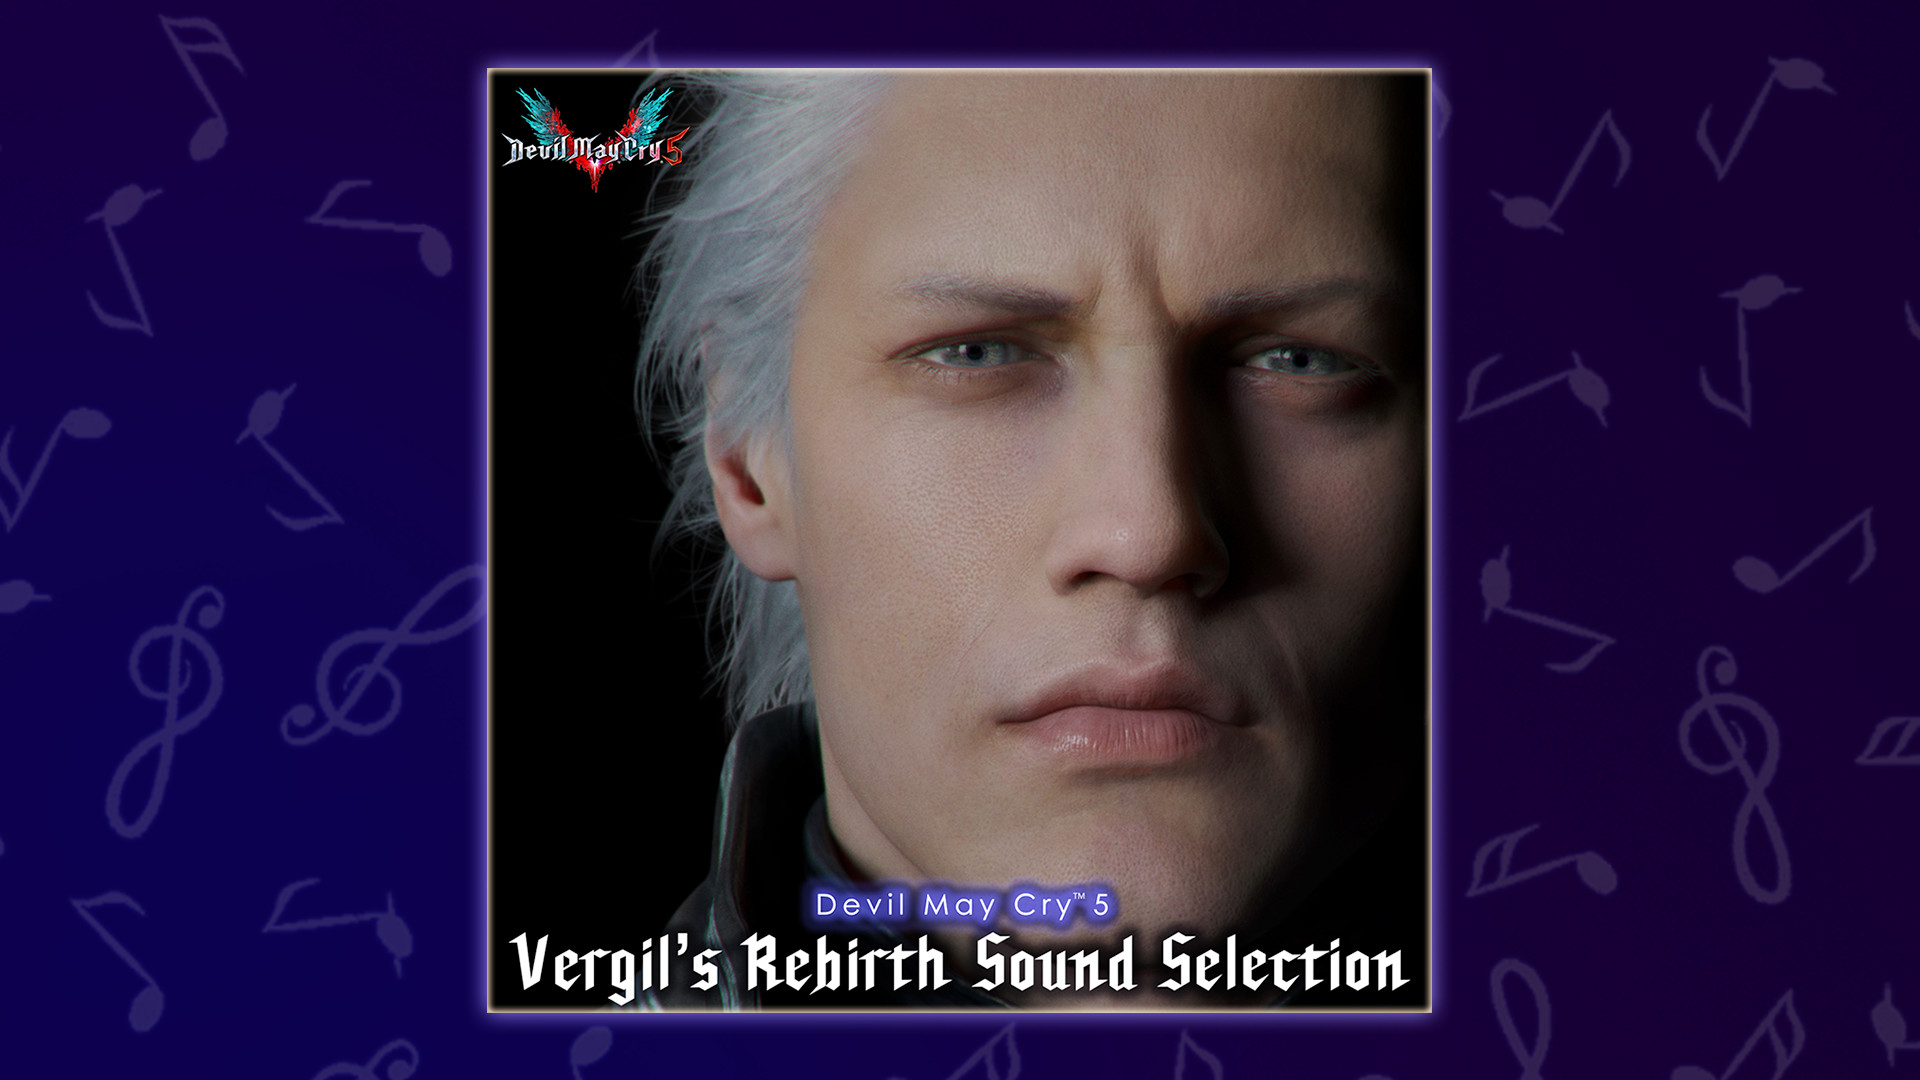 Devil May Cry 5 Vergil's Rebirth Sound Selection Featured Screenshot #1